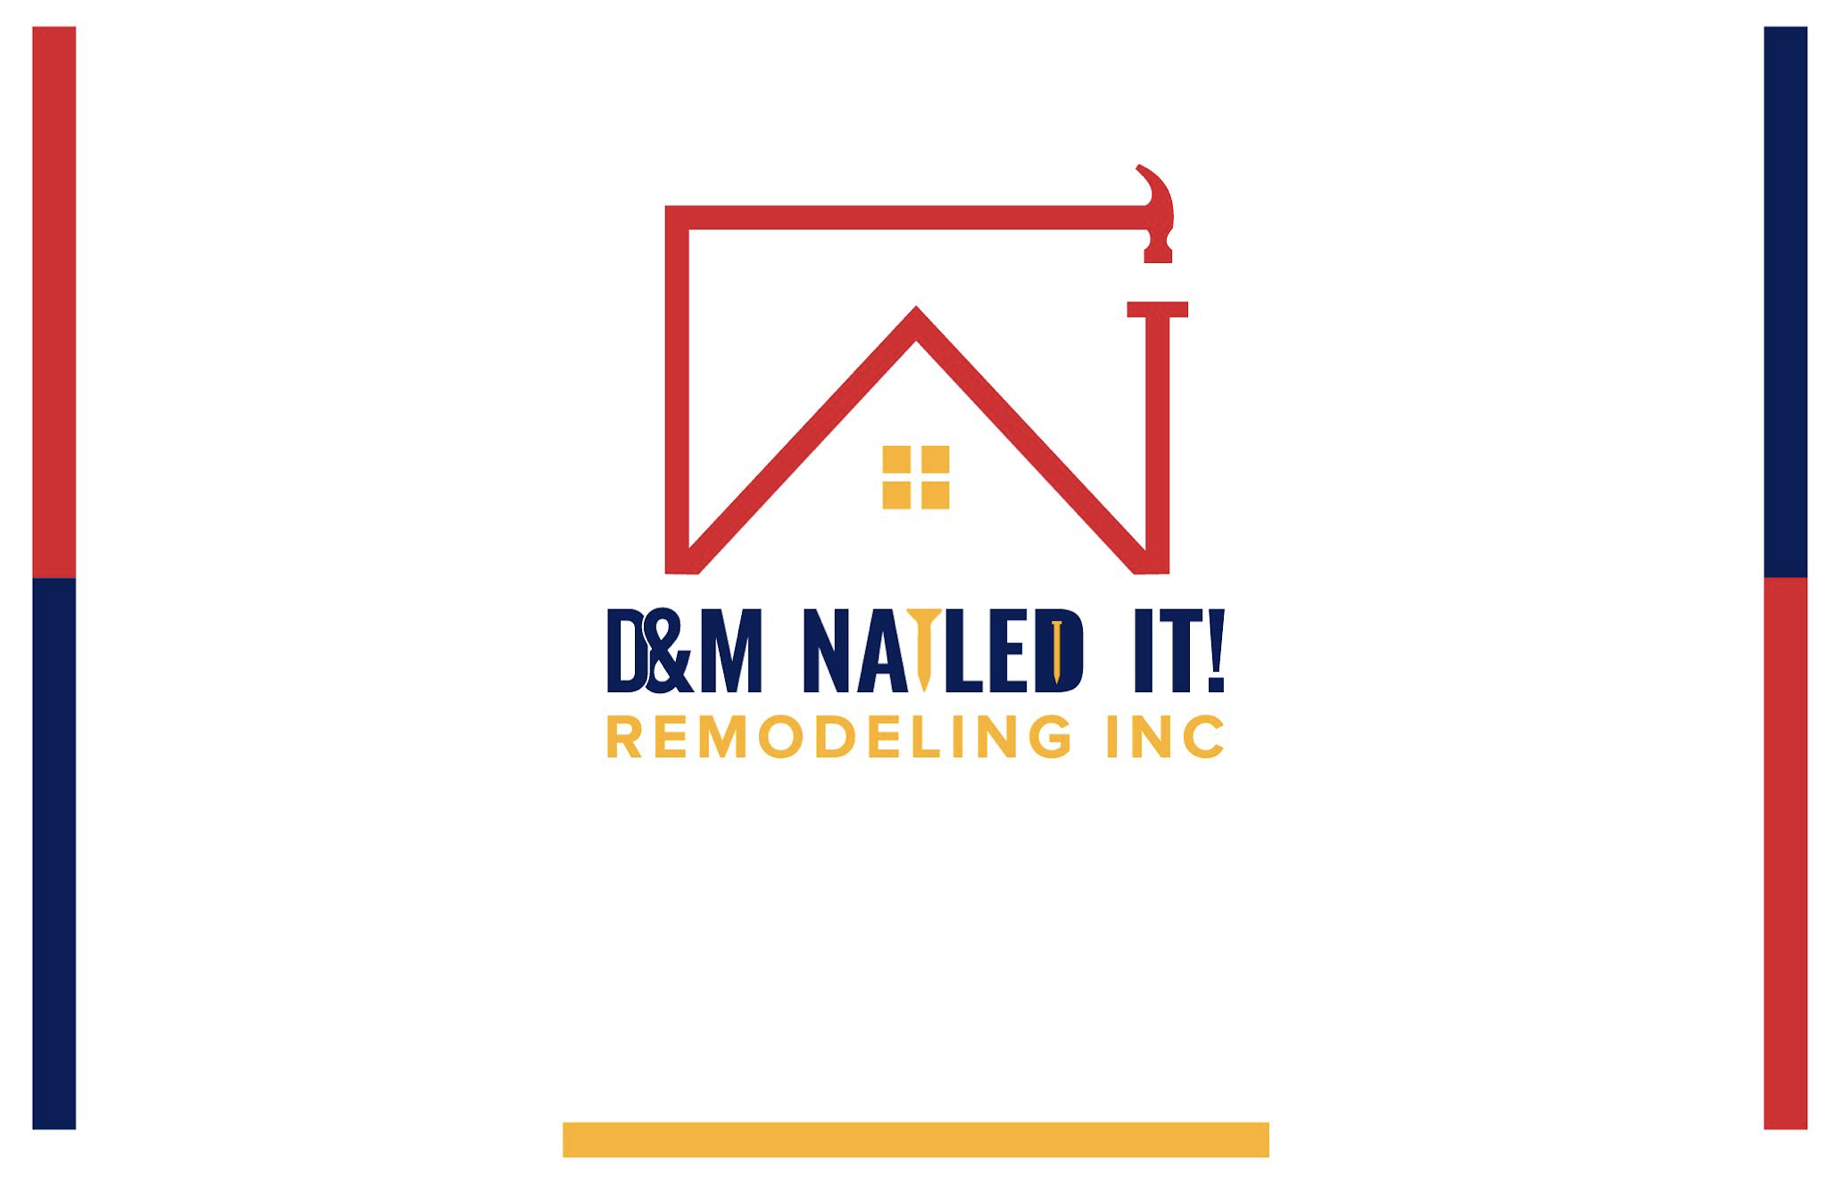 D&M Nailed It Remodeling Inc Logo